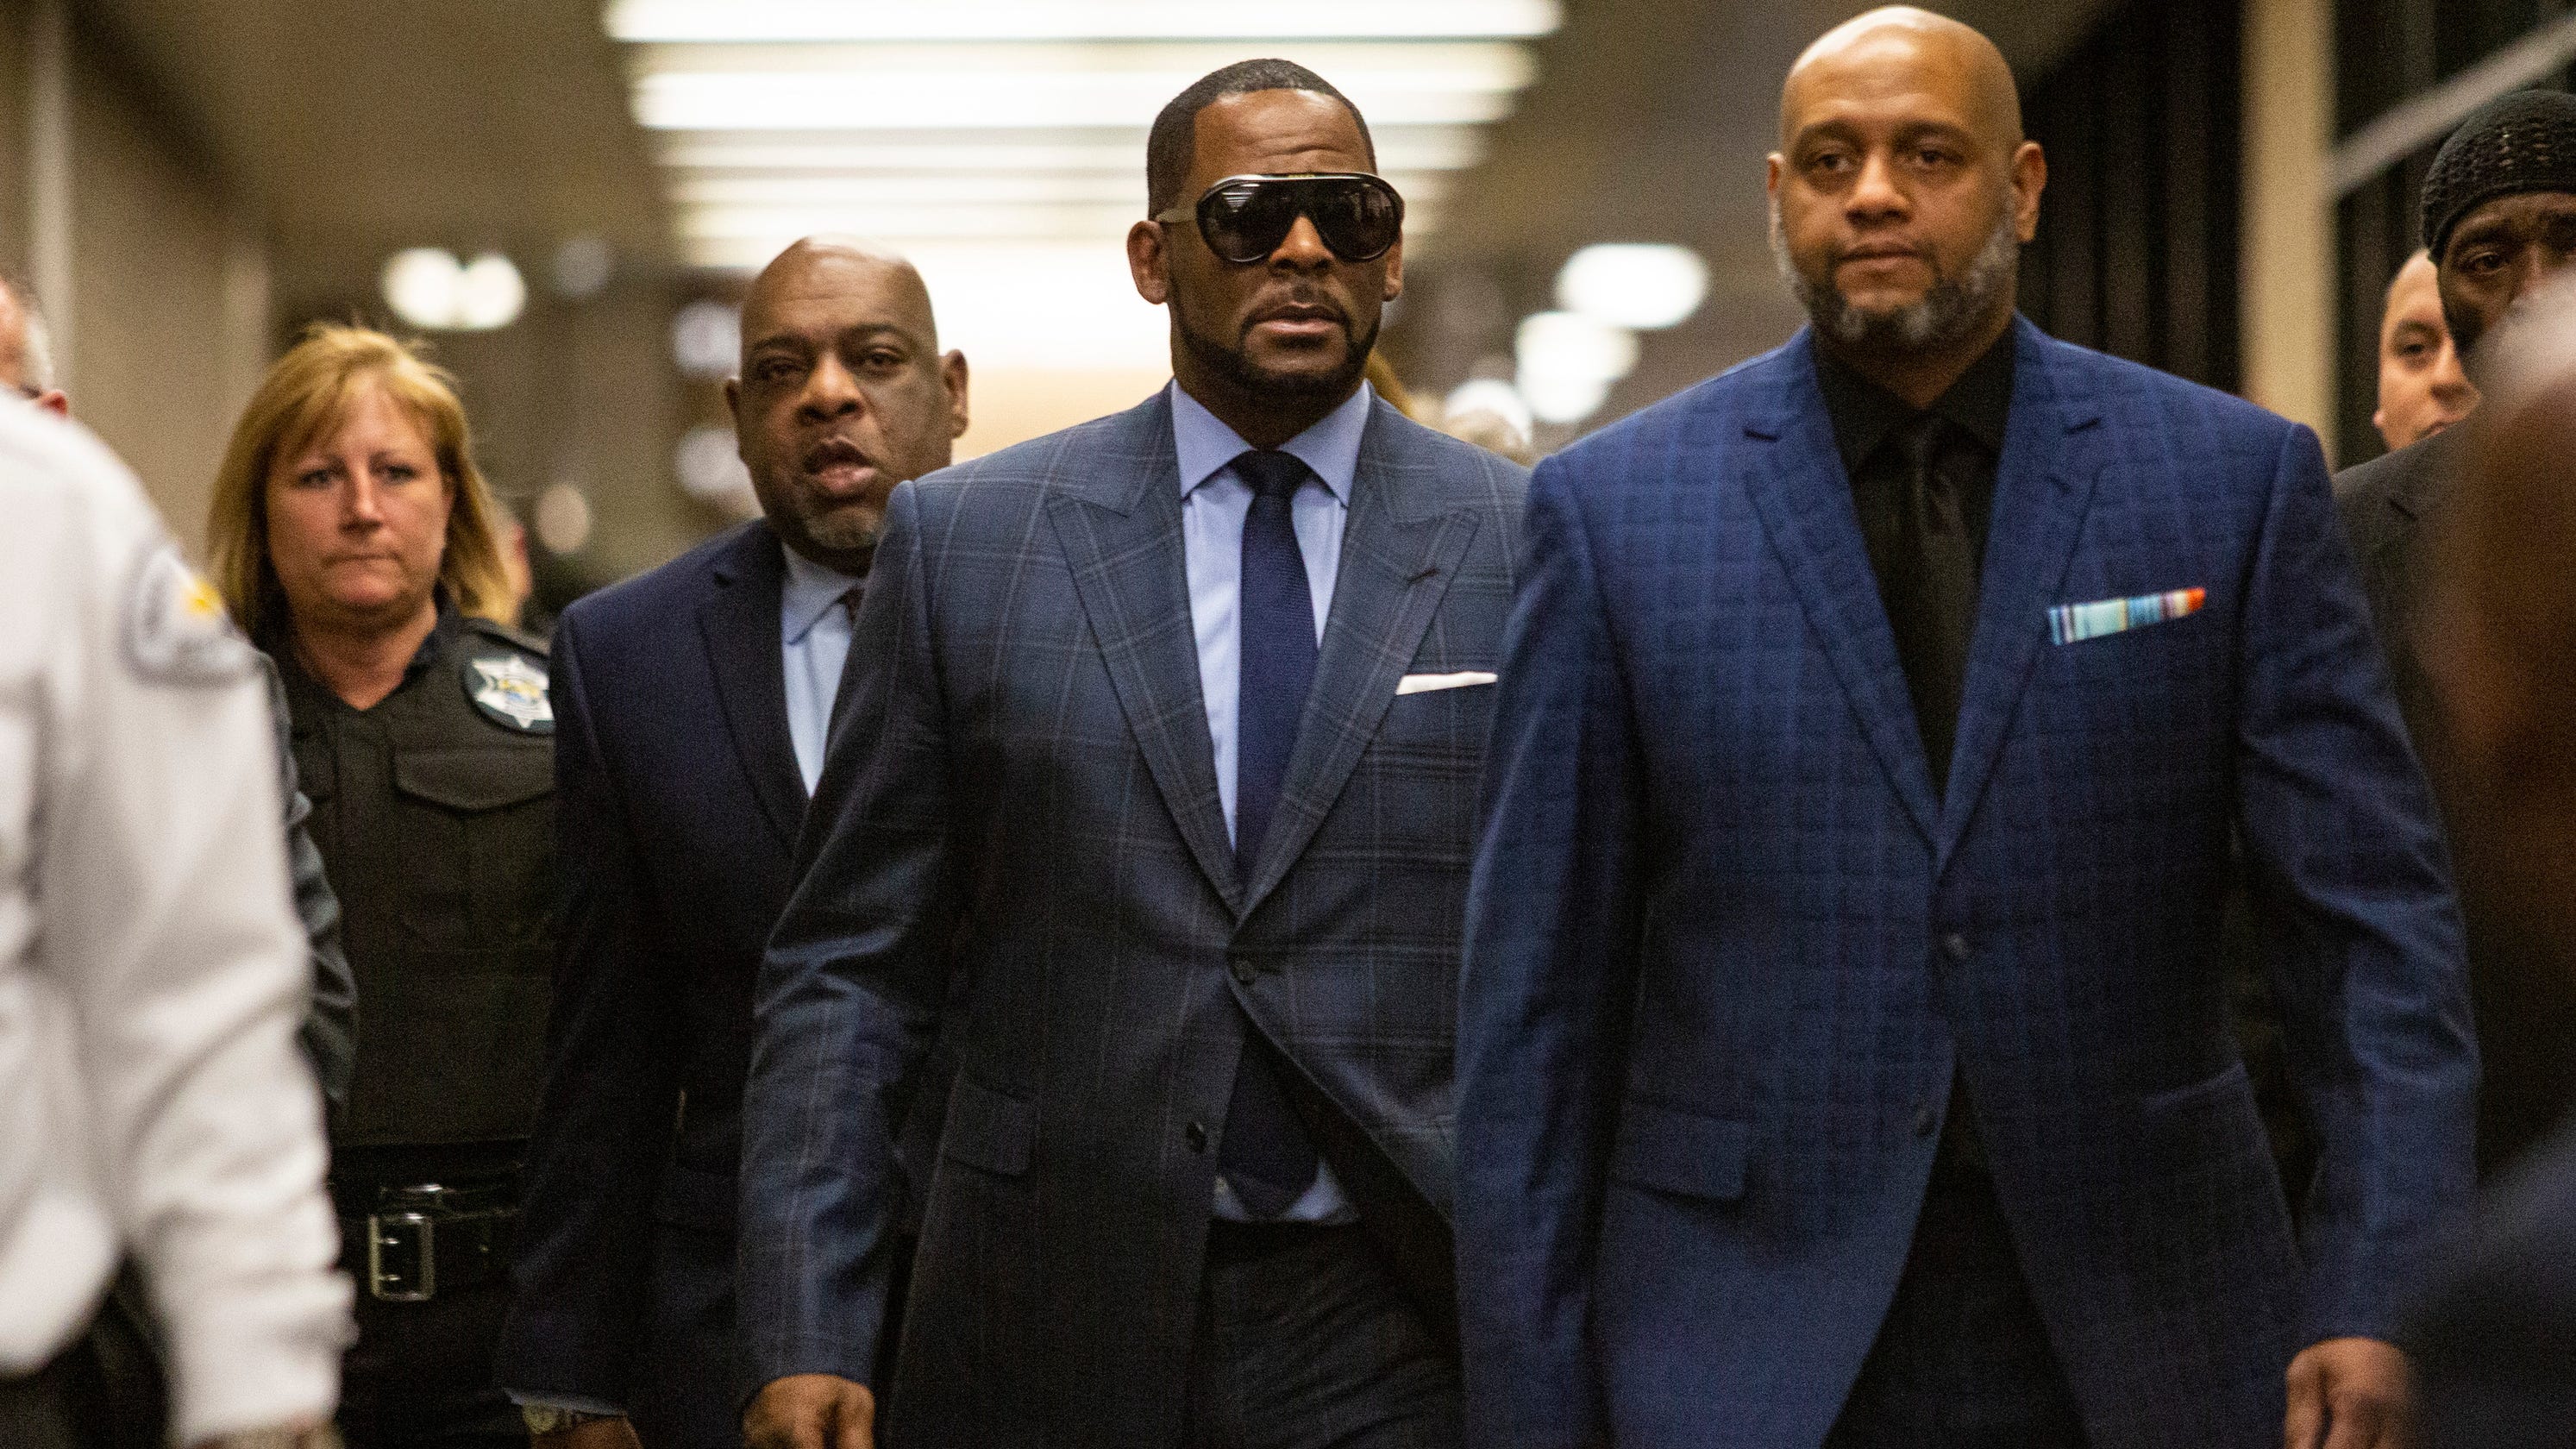 R. Kelly goes to jail after child support hearing, CBS interview2987 x 1680